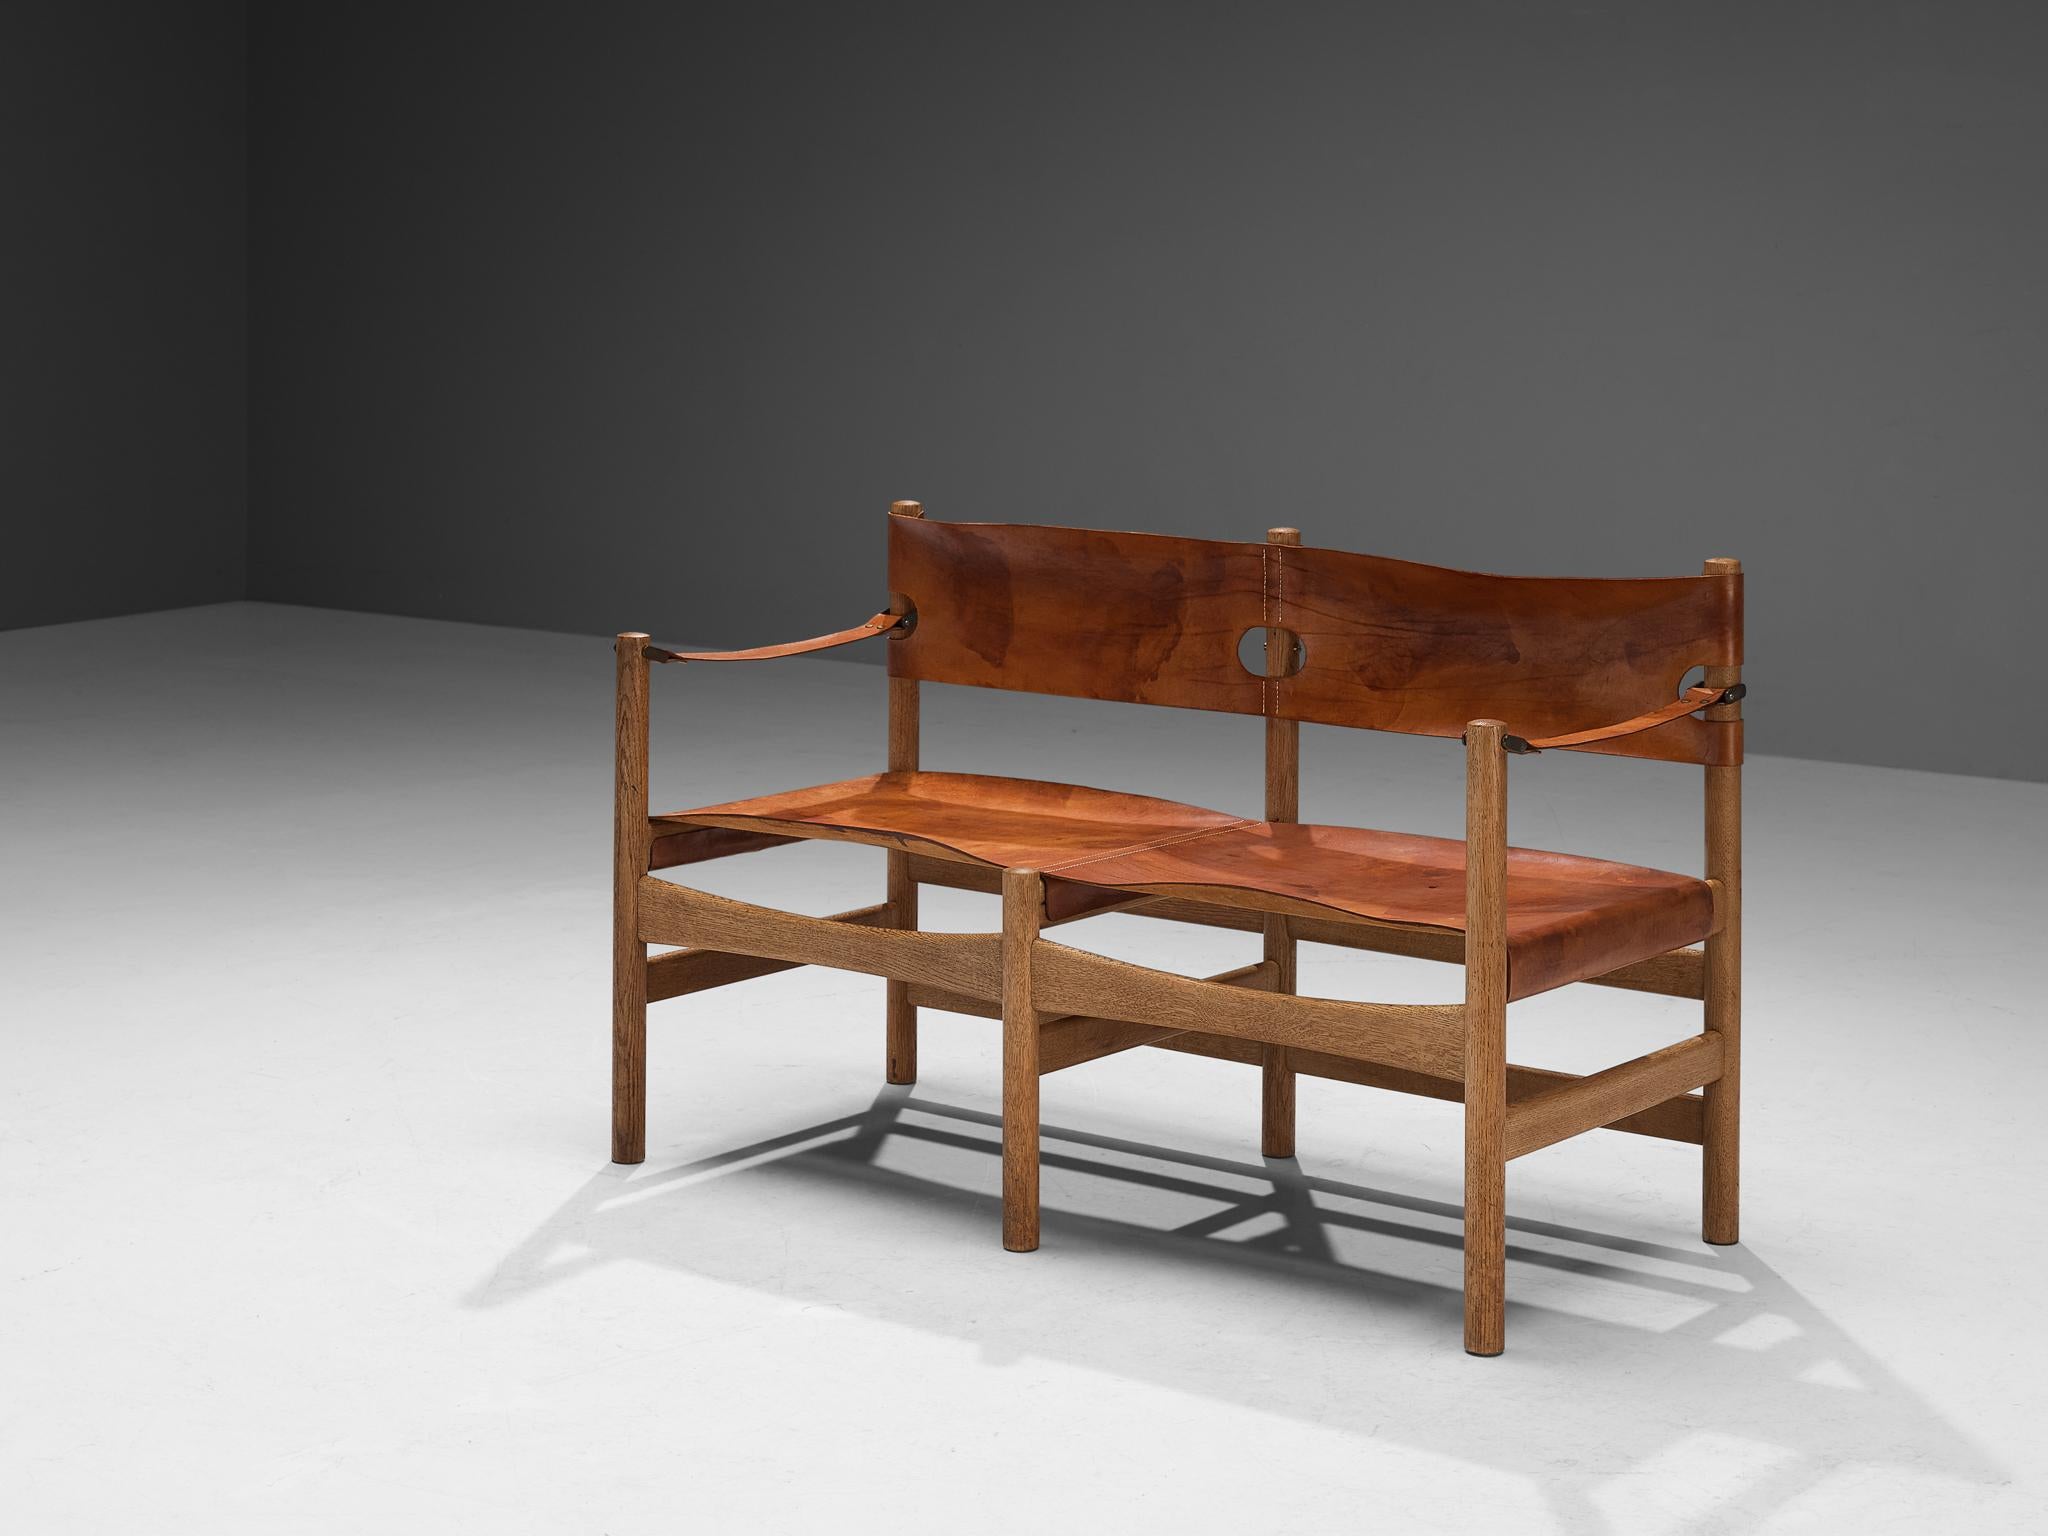 Børge Mogensen for Fredericia Stolefabrik, ‘Safari’ sofa or bench model '2222', saddle leather, oak, brass, Denmark, 1960s.

This rare sofa reminds of the classical foldable 'director-chairs', yet this design by Danish designer Børge Mogensen